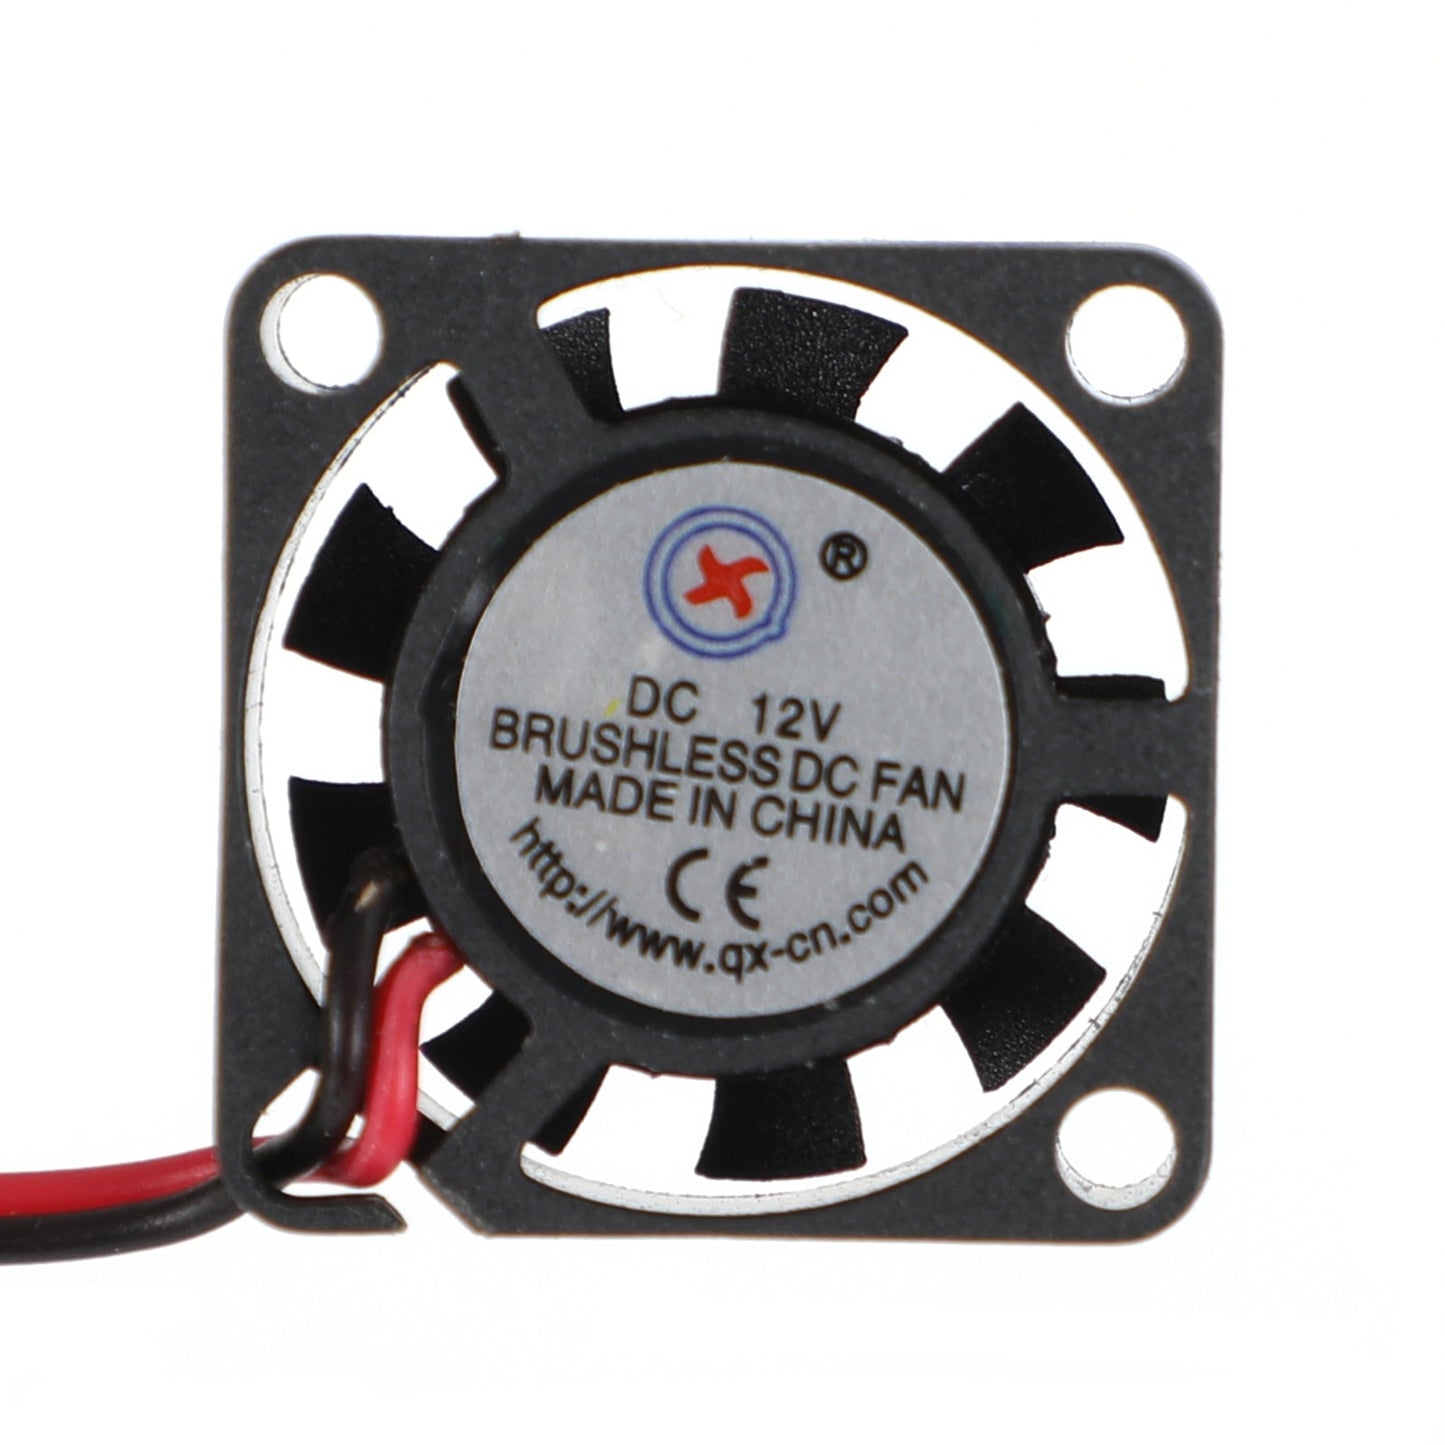 1Pc Brushless DC Cooling Blower Fan 12V 0.06A 2006 20x20x6mm Sleeve 2 Pin Wire